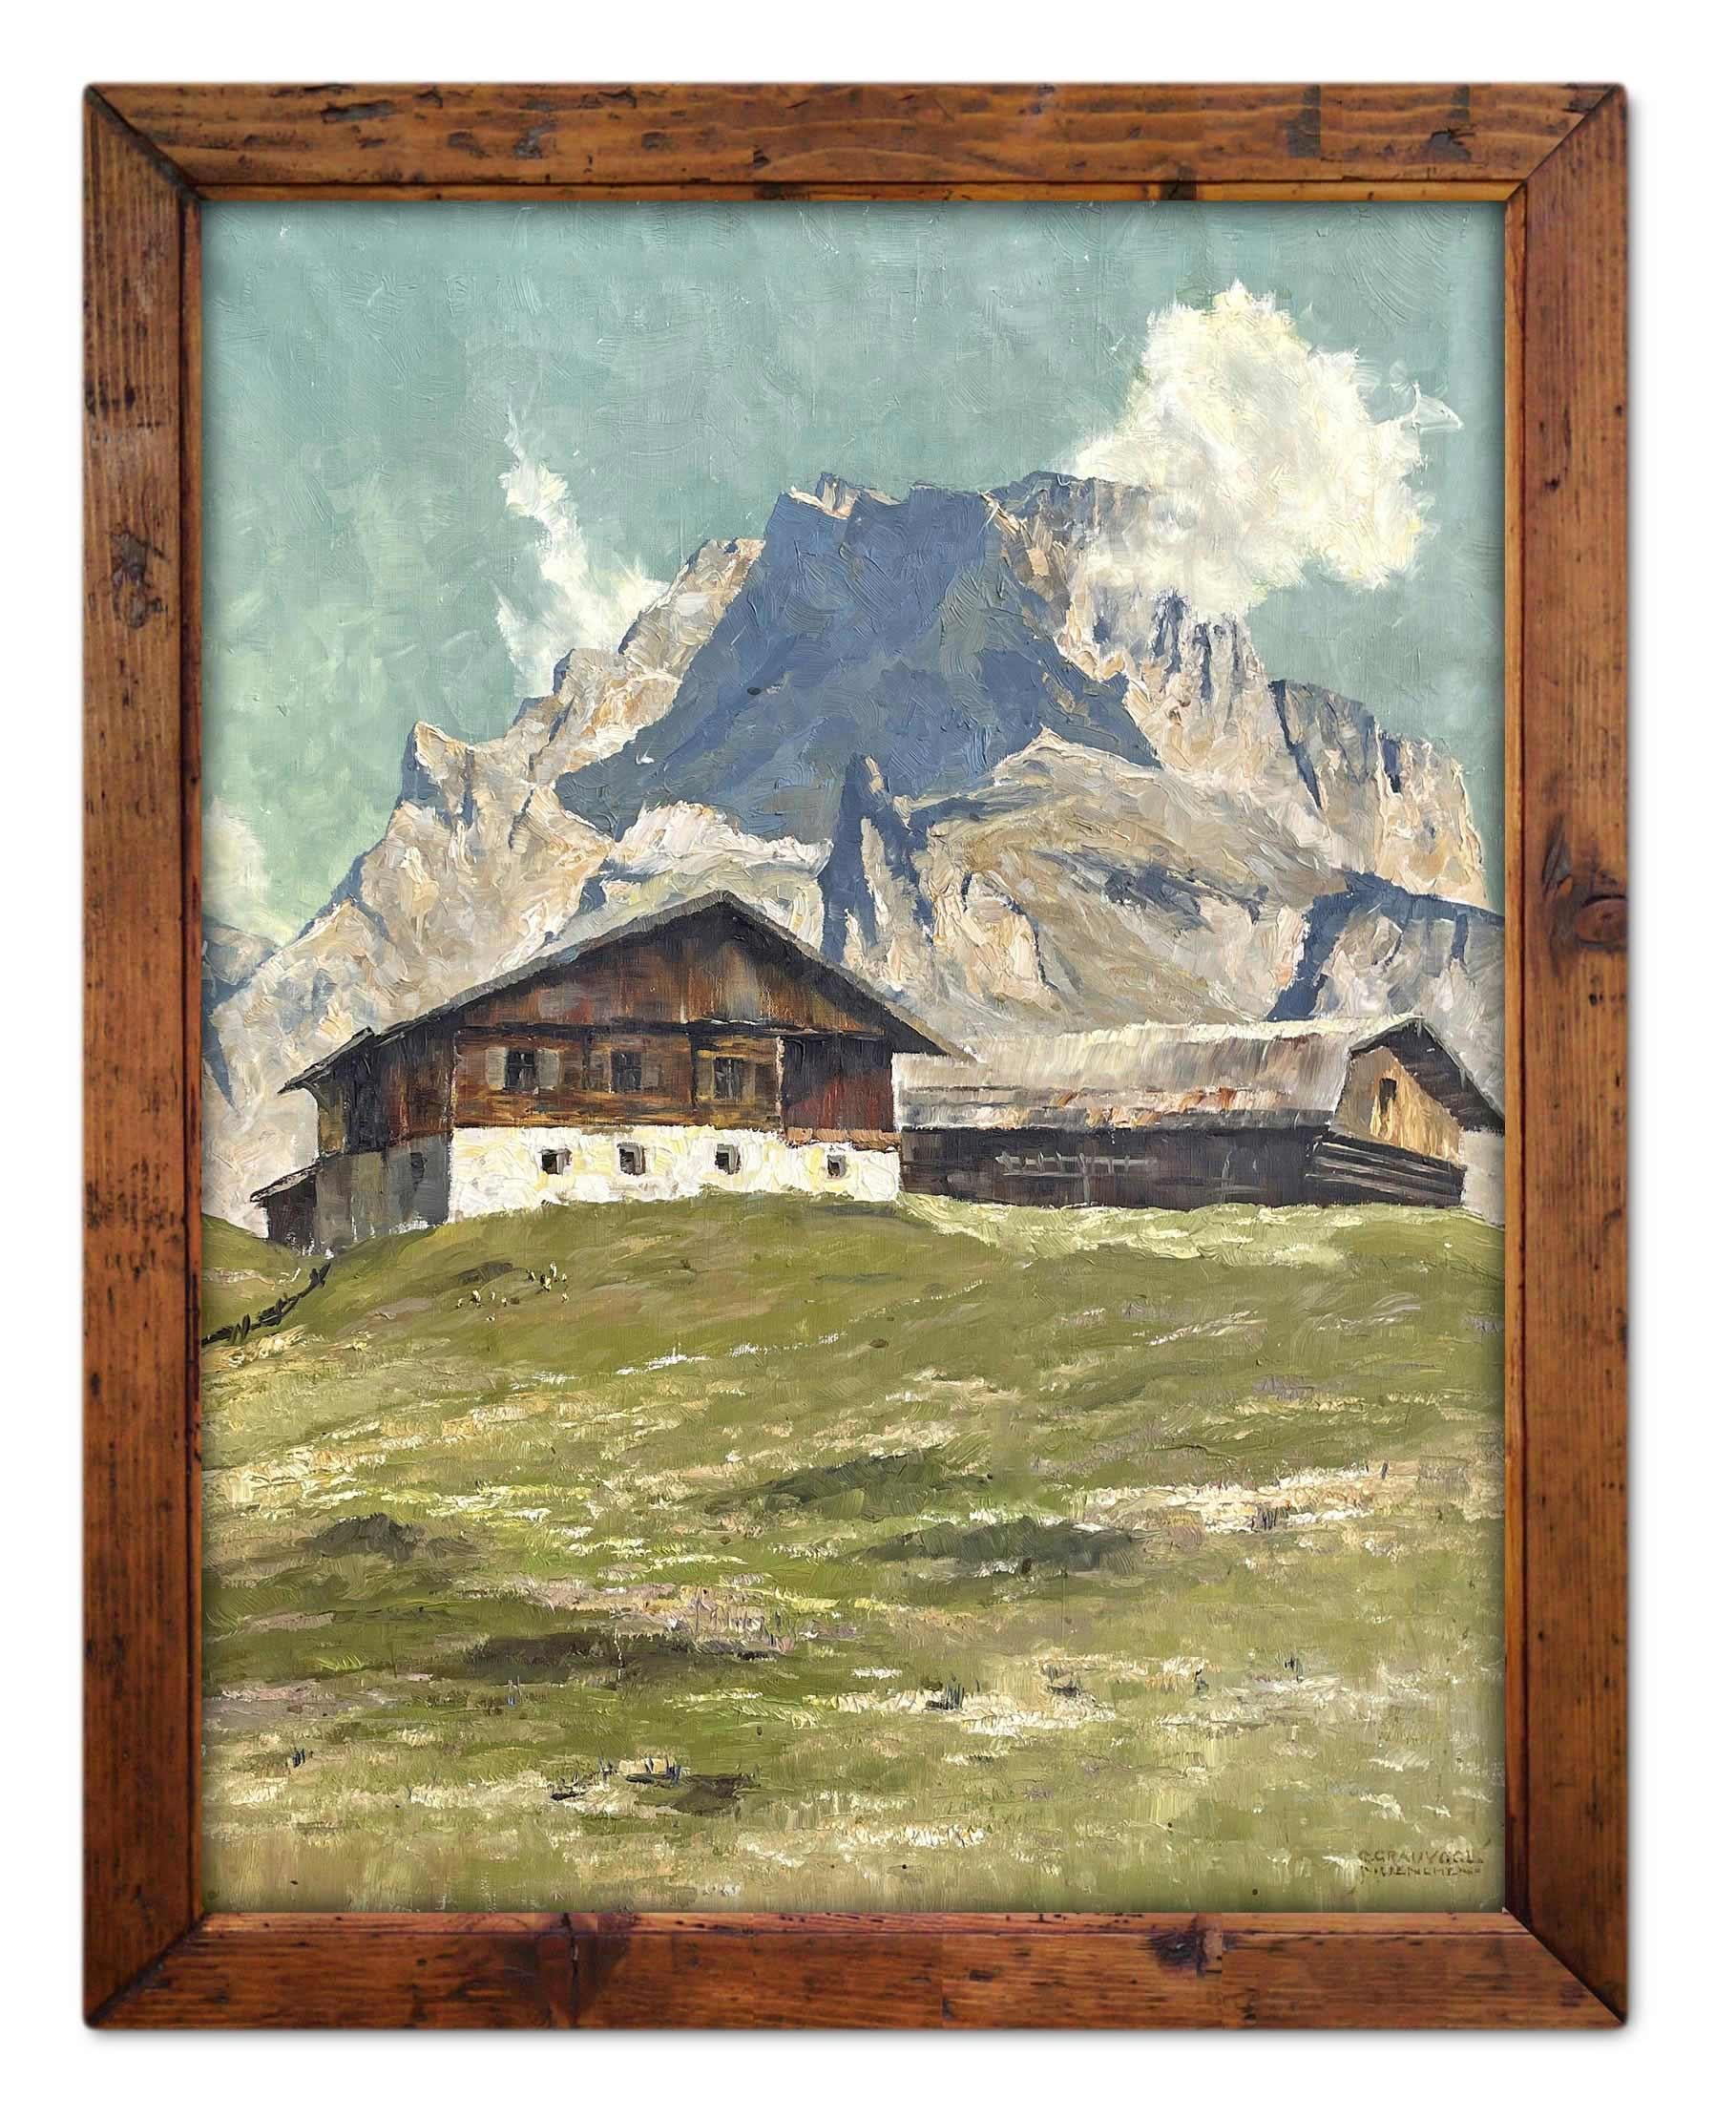 View of Gardena Pass Italian Dolomites Oil on Canvas by Georg Grauvogl  10